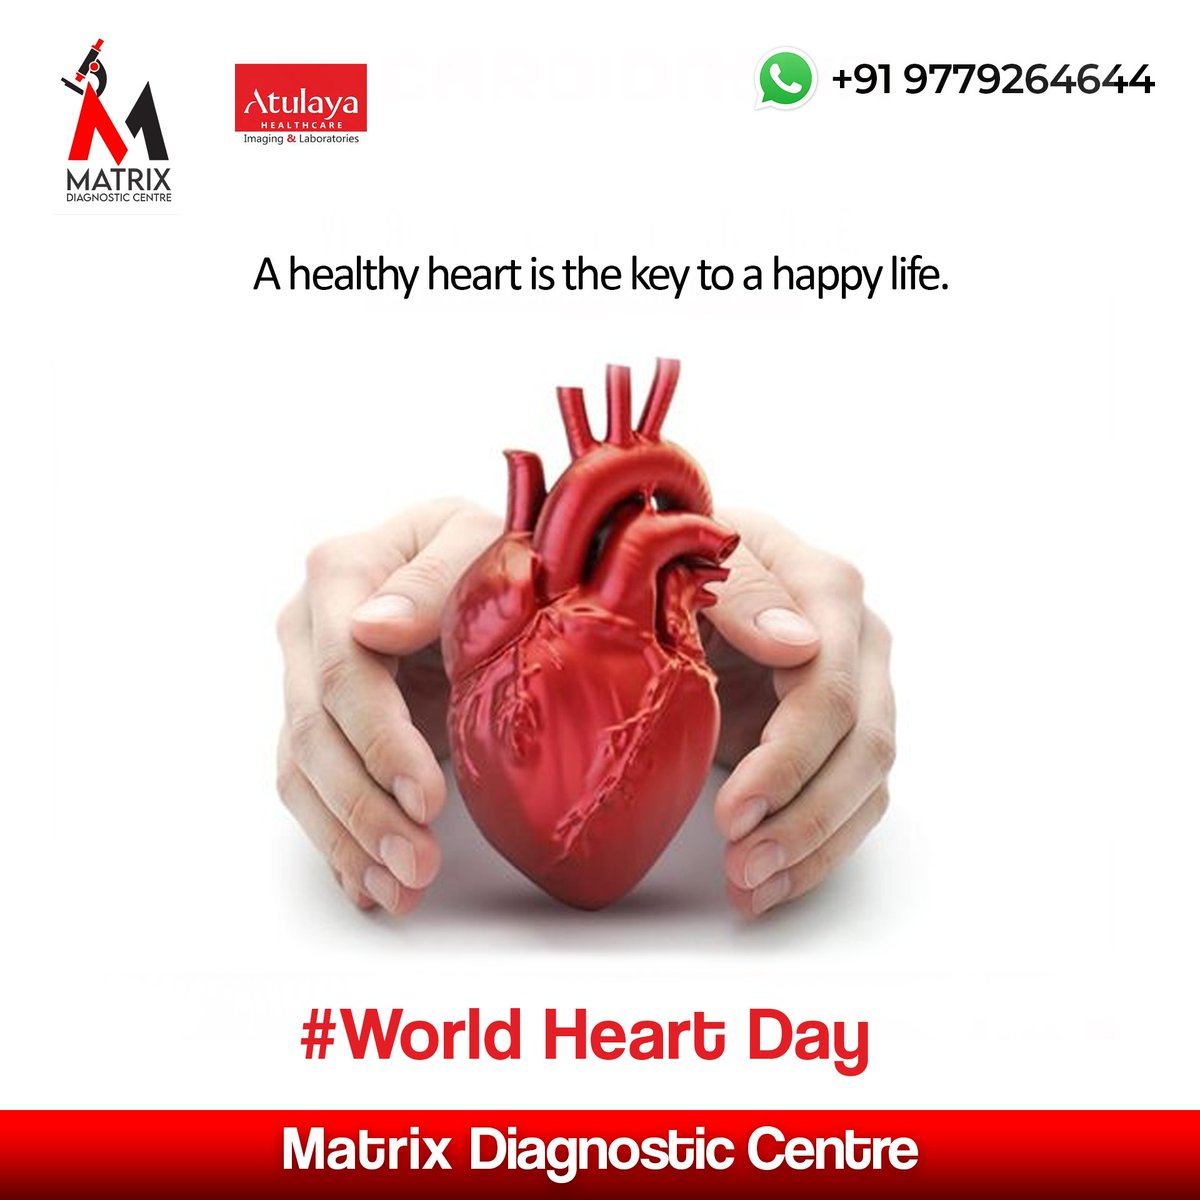 ❤️🤝This World Heart Day, let's support organizations working to improve heart health worldwide. Every little bit helps, and together, we can make a difference!

#SupportHeartHealth #WorldHeartDay #worldhealthday #hearthealth